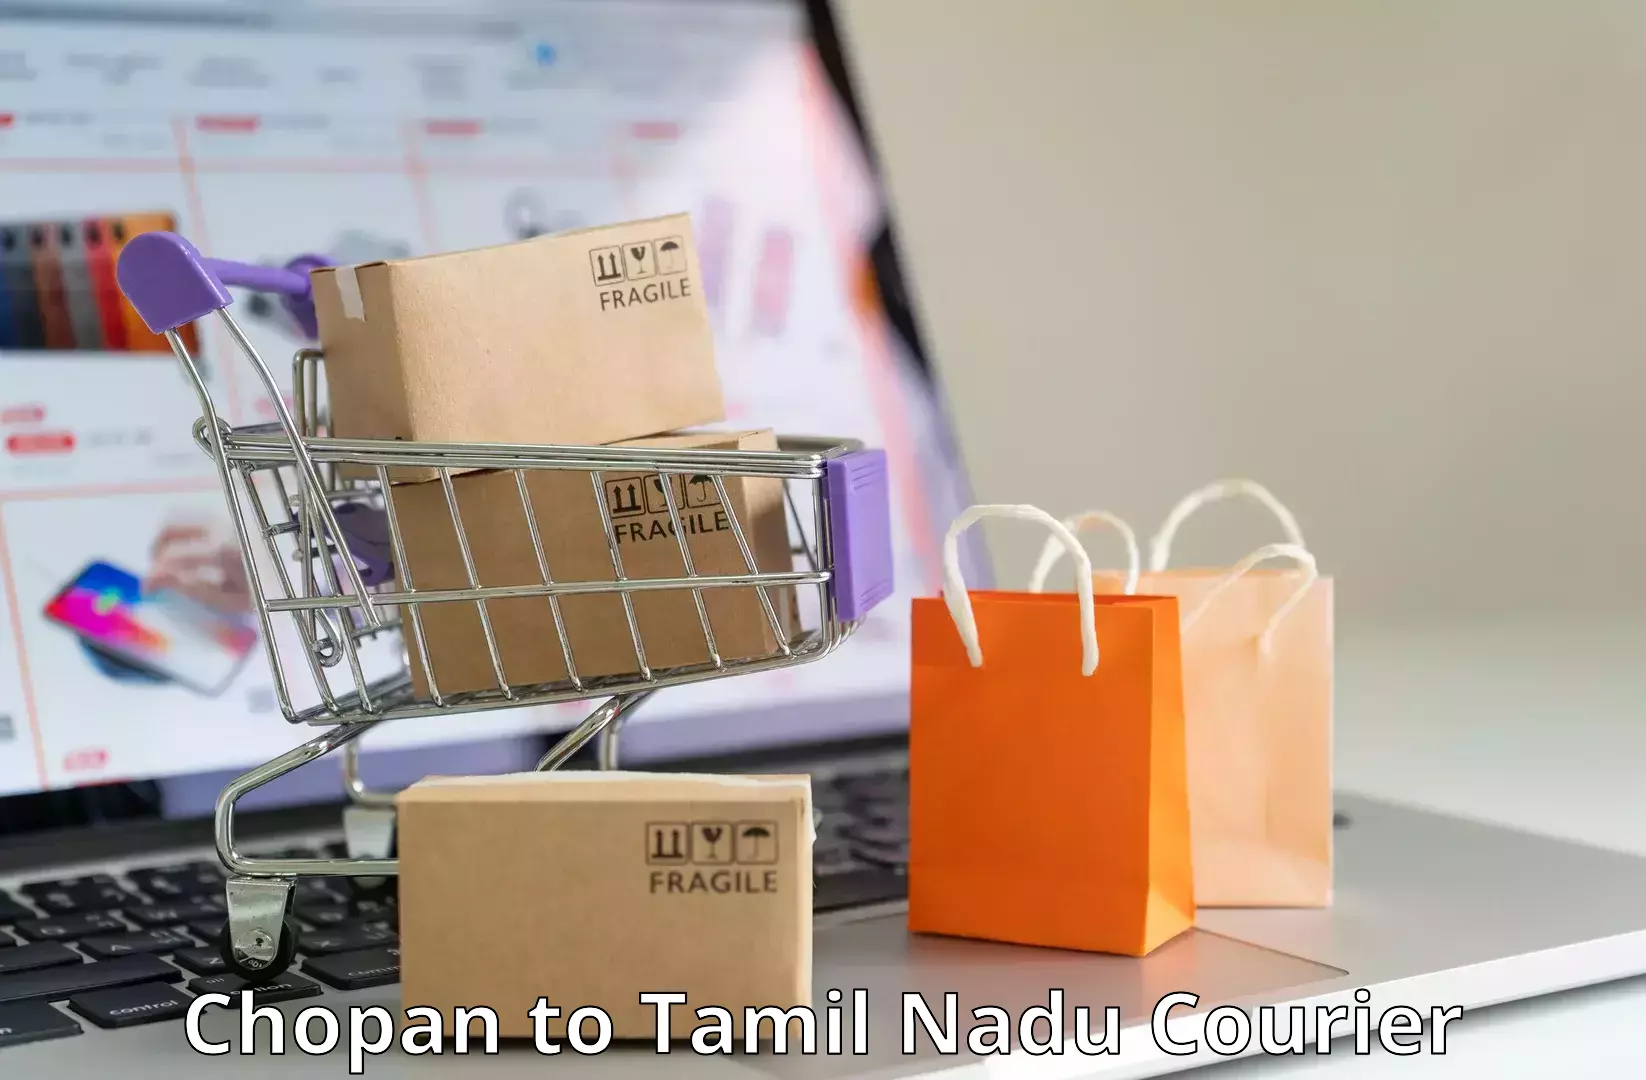 Integrated shipping solutions Chopan to Tamil Nadu